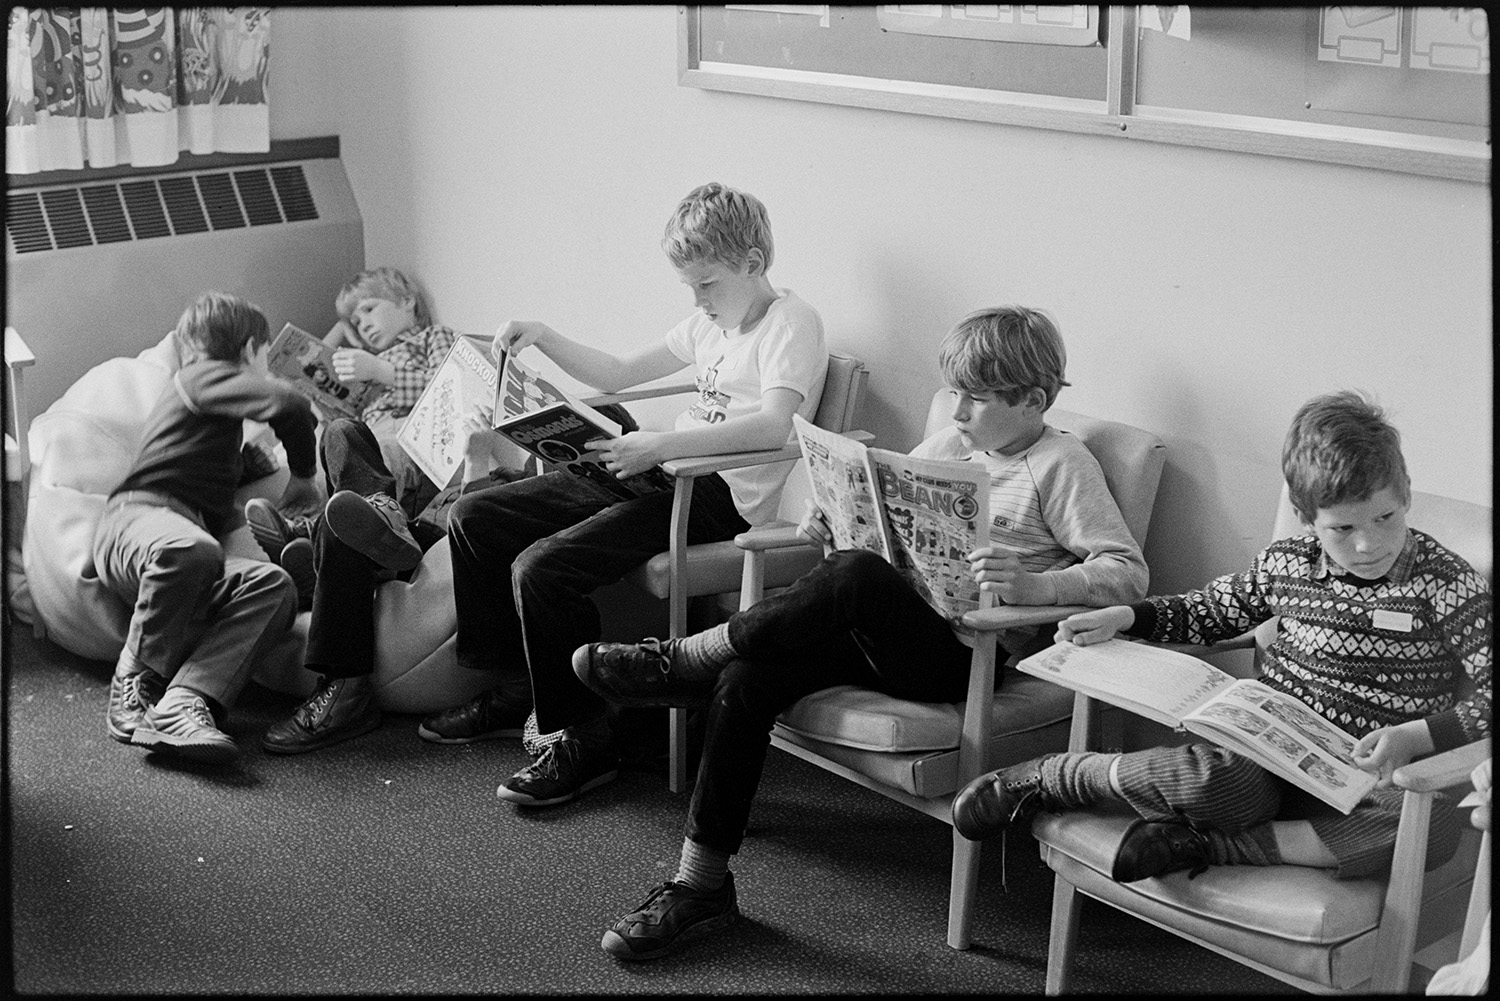 Ward Sister and nurses in ward of hospital. 
[Five boys sat on chairs and beanbags reading books and magazines in the Children's Ward at Barnstaple General Hospital. One boy is reading the Beano comic.]